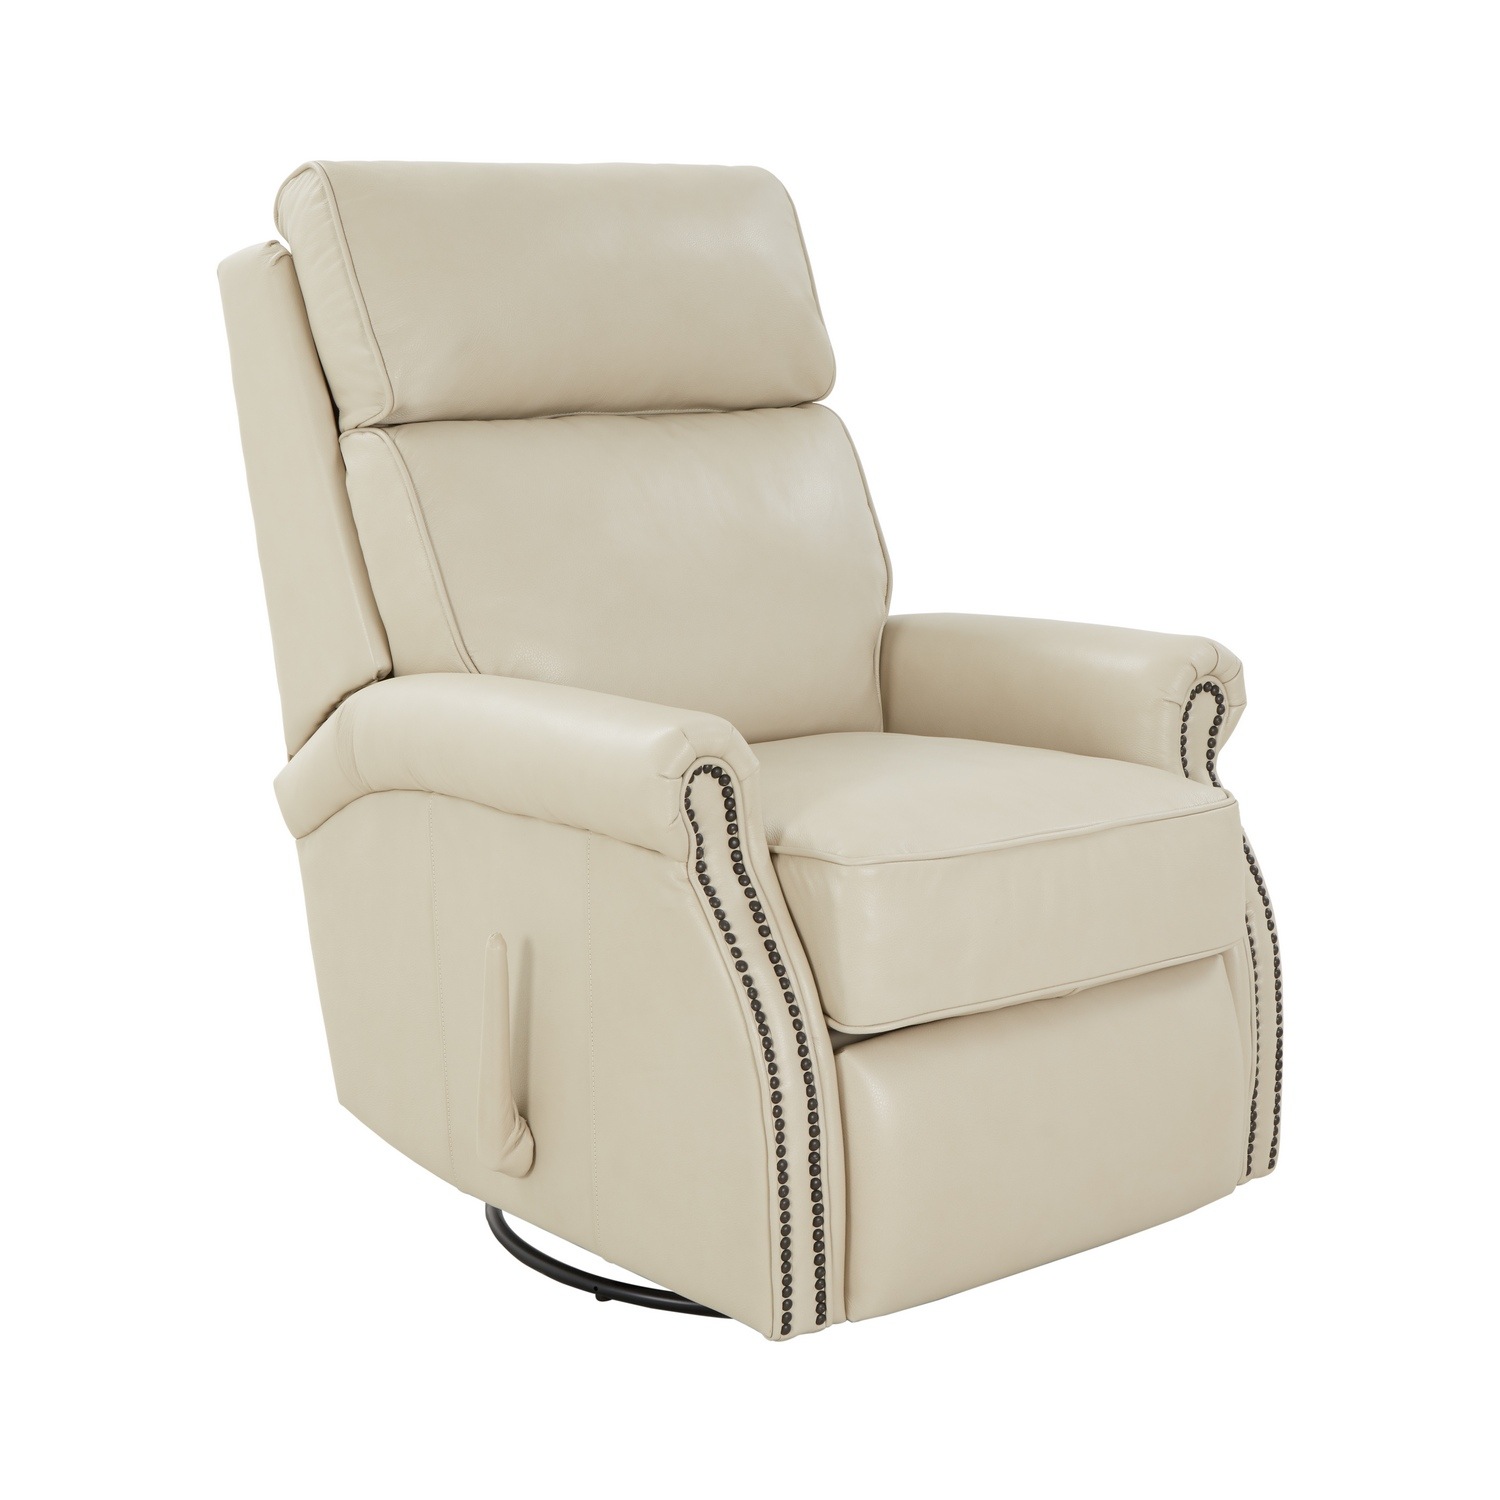 Barcalounger Crews Swivel Glider Recliner Chair - Barone Parchment/All Leather